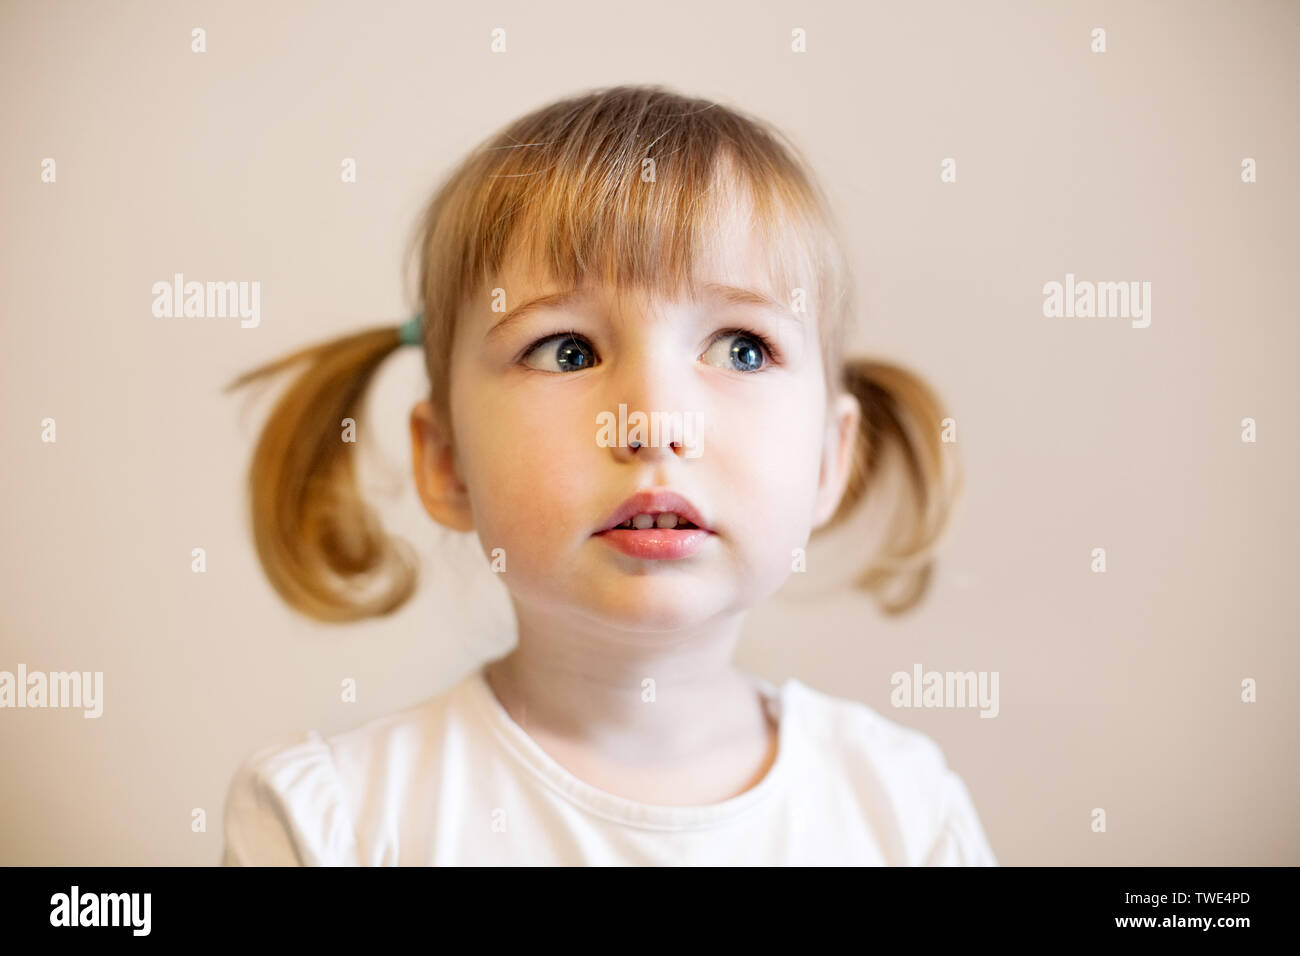 cute child girl with two pigtails and quiff of blonde hair closeup portrait Stock Photo